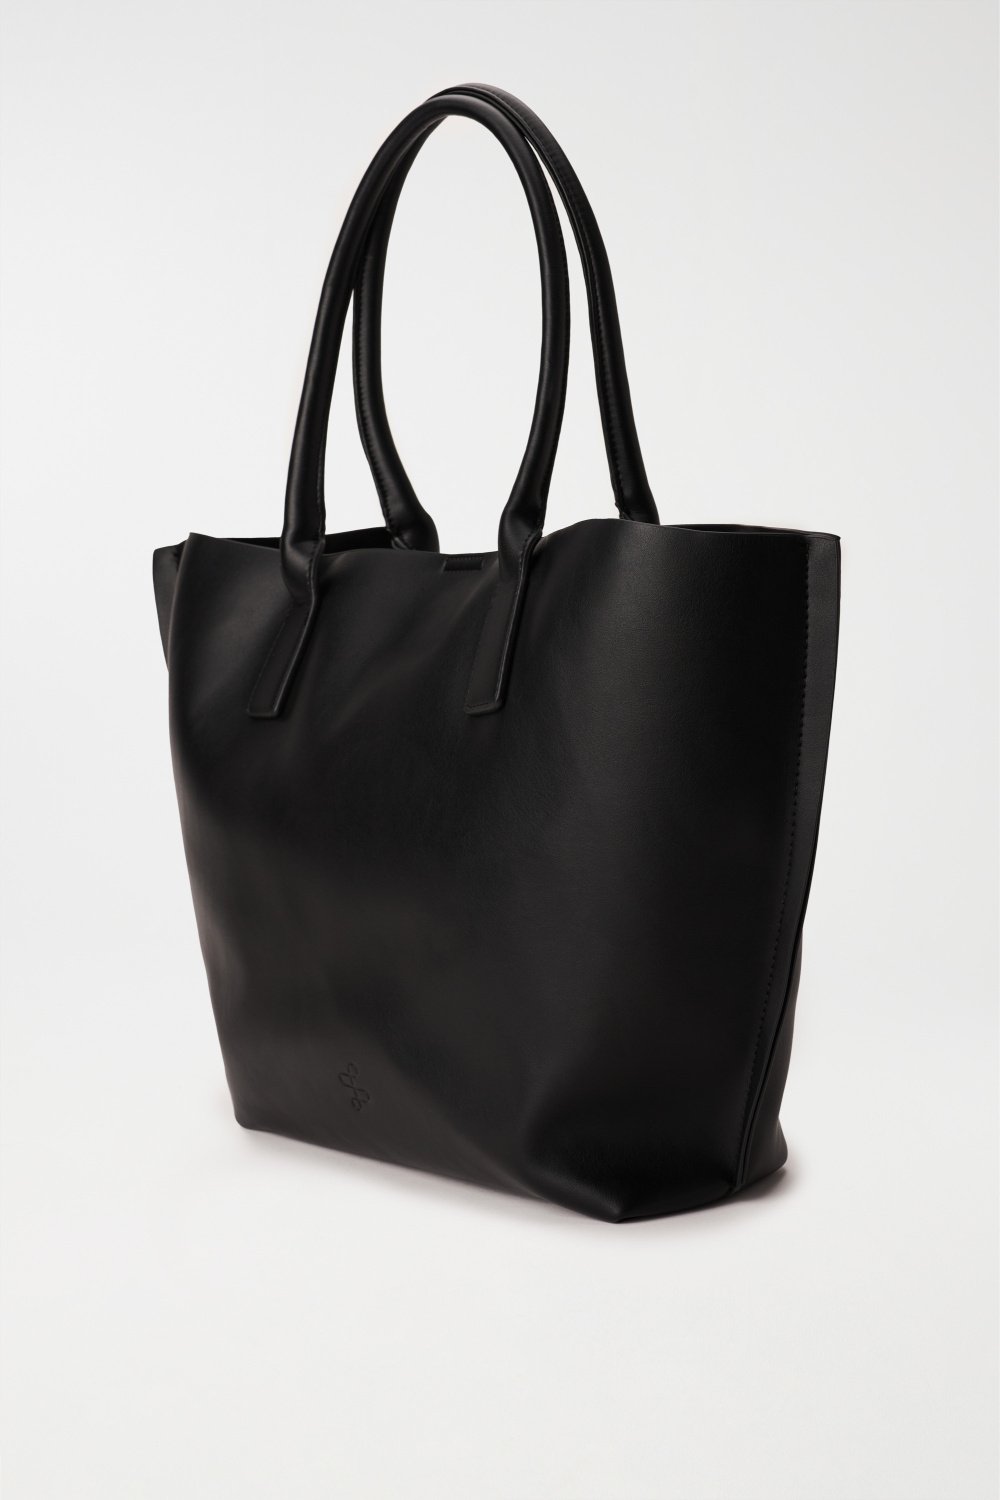 LEATHER EFFECT TOTE BAG - Salsa